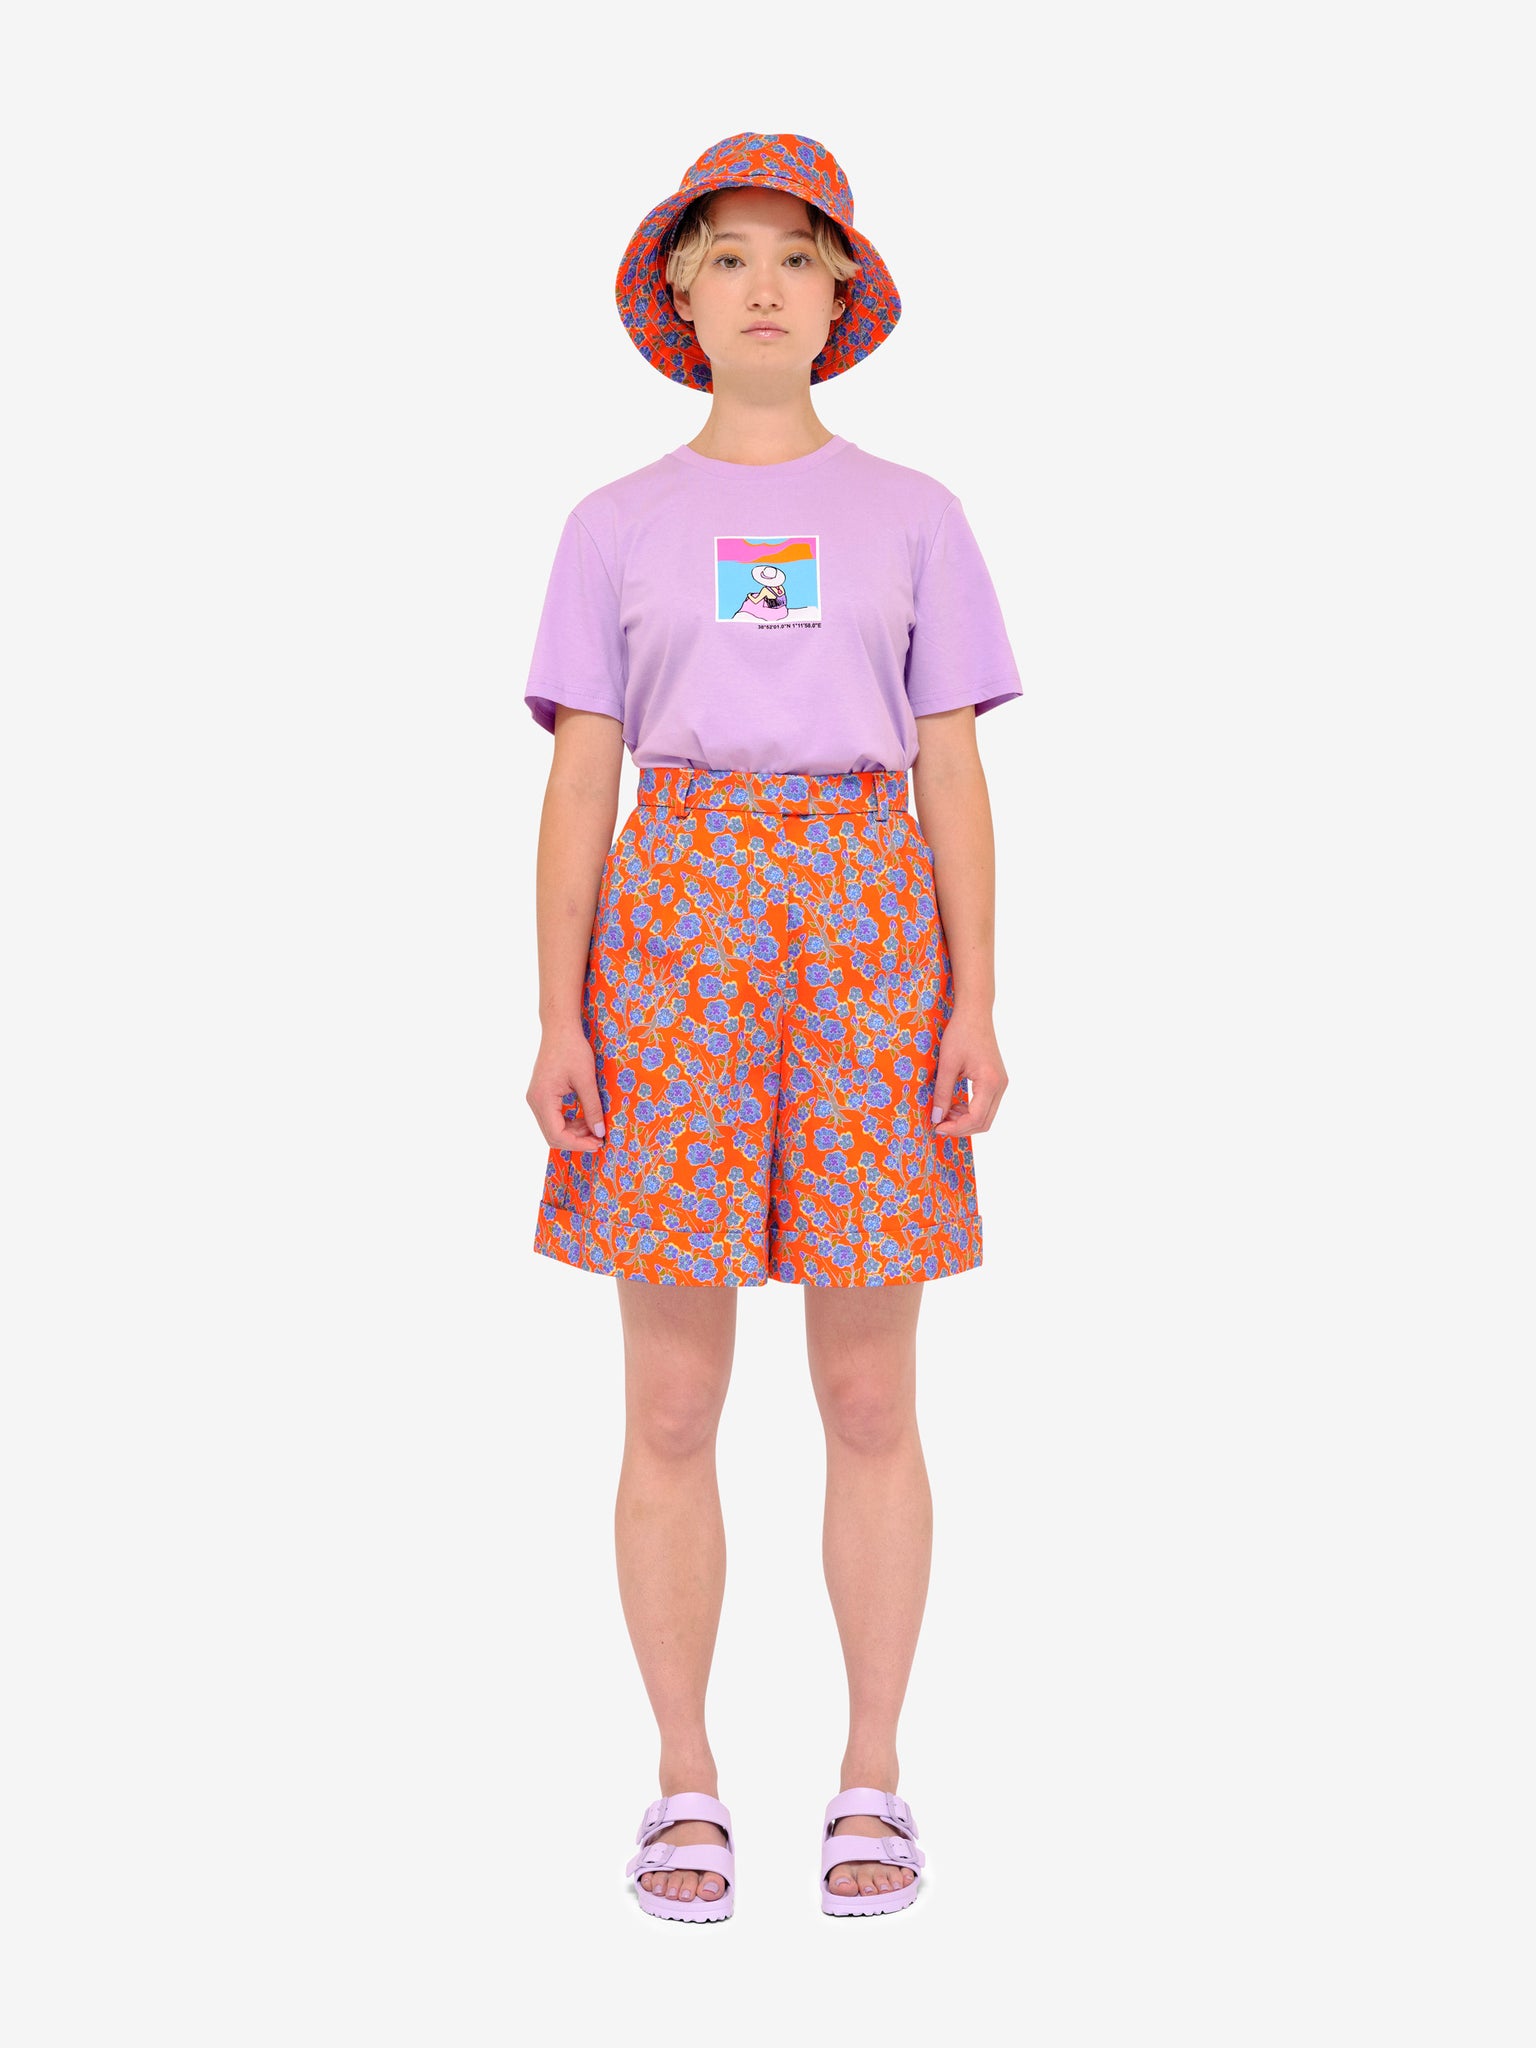 Model wearing Crimson Rose Es Vedrà lilac T-shirt with orange floral print shorts and bucket hat and lilac sandals. Photography Rowan Corr.